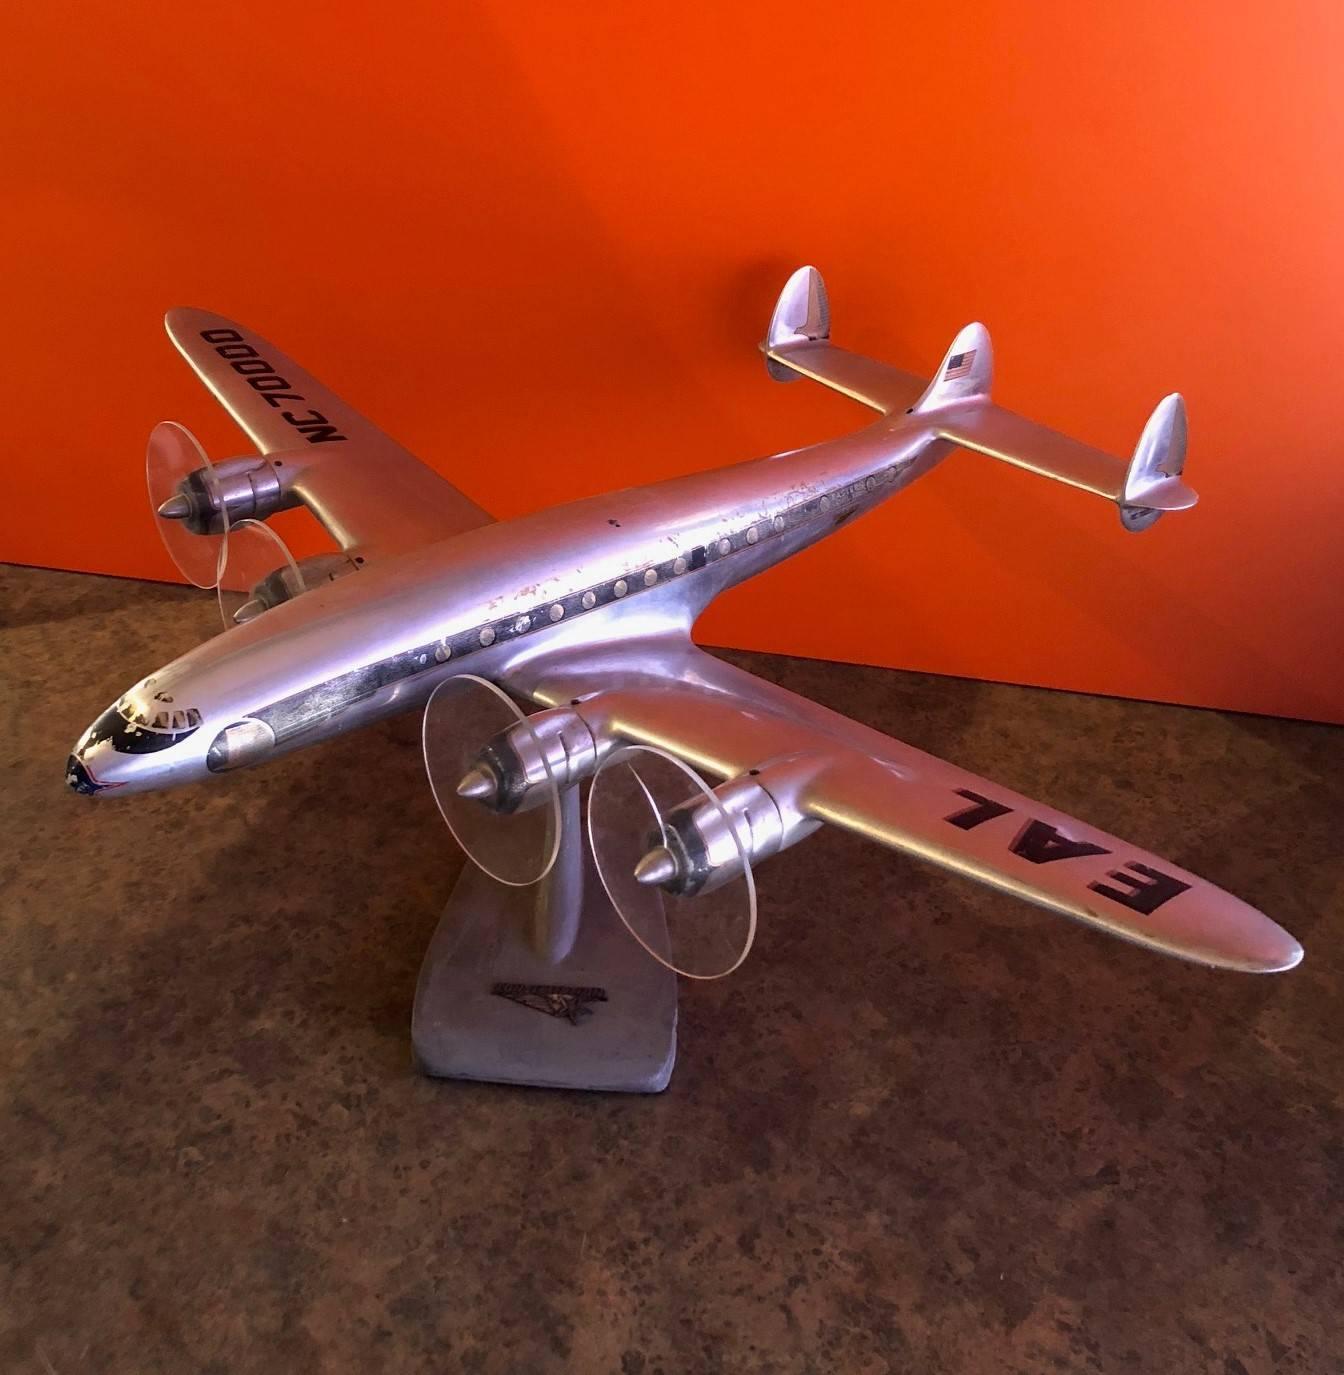 Very rare Lockheed Corporation L-1049 Super Constellation (Connie) Eastern Airlines model airplane, circa 1950s. The plane is massive measuring 26.5